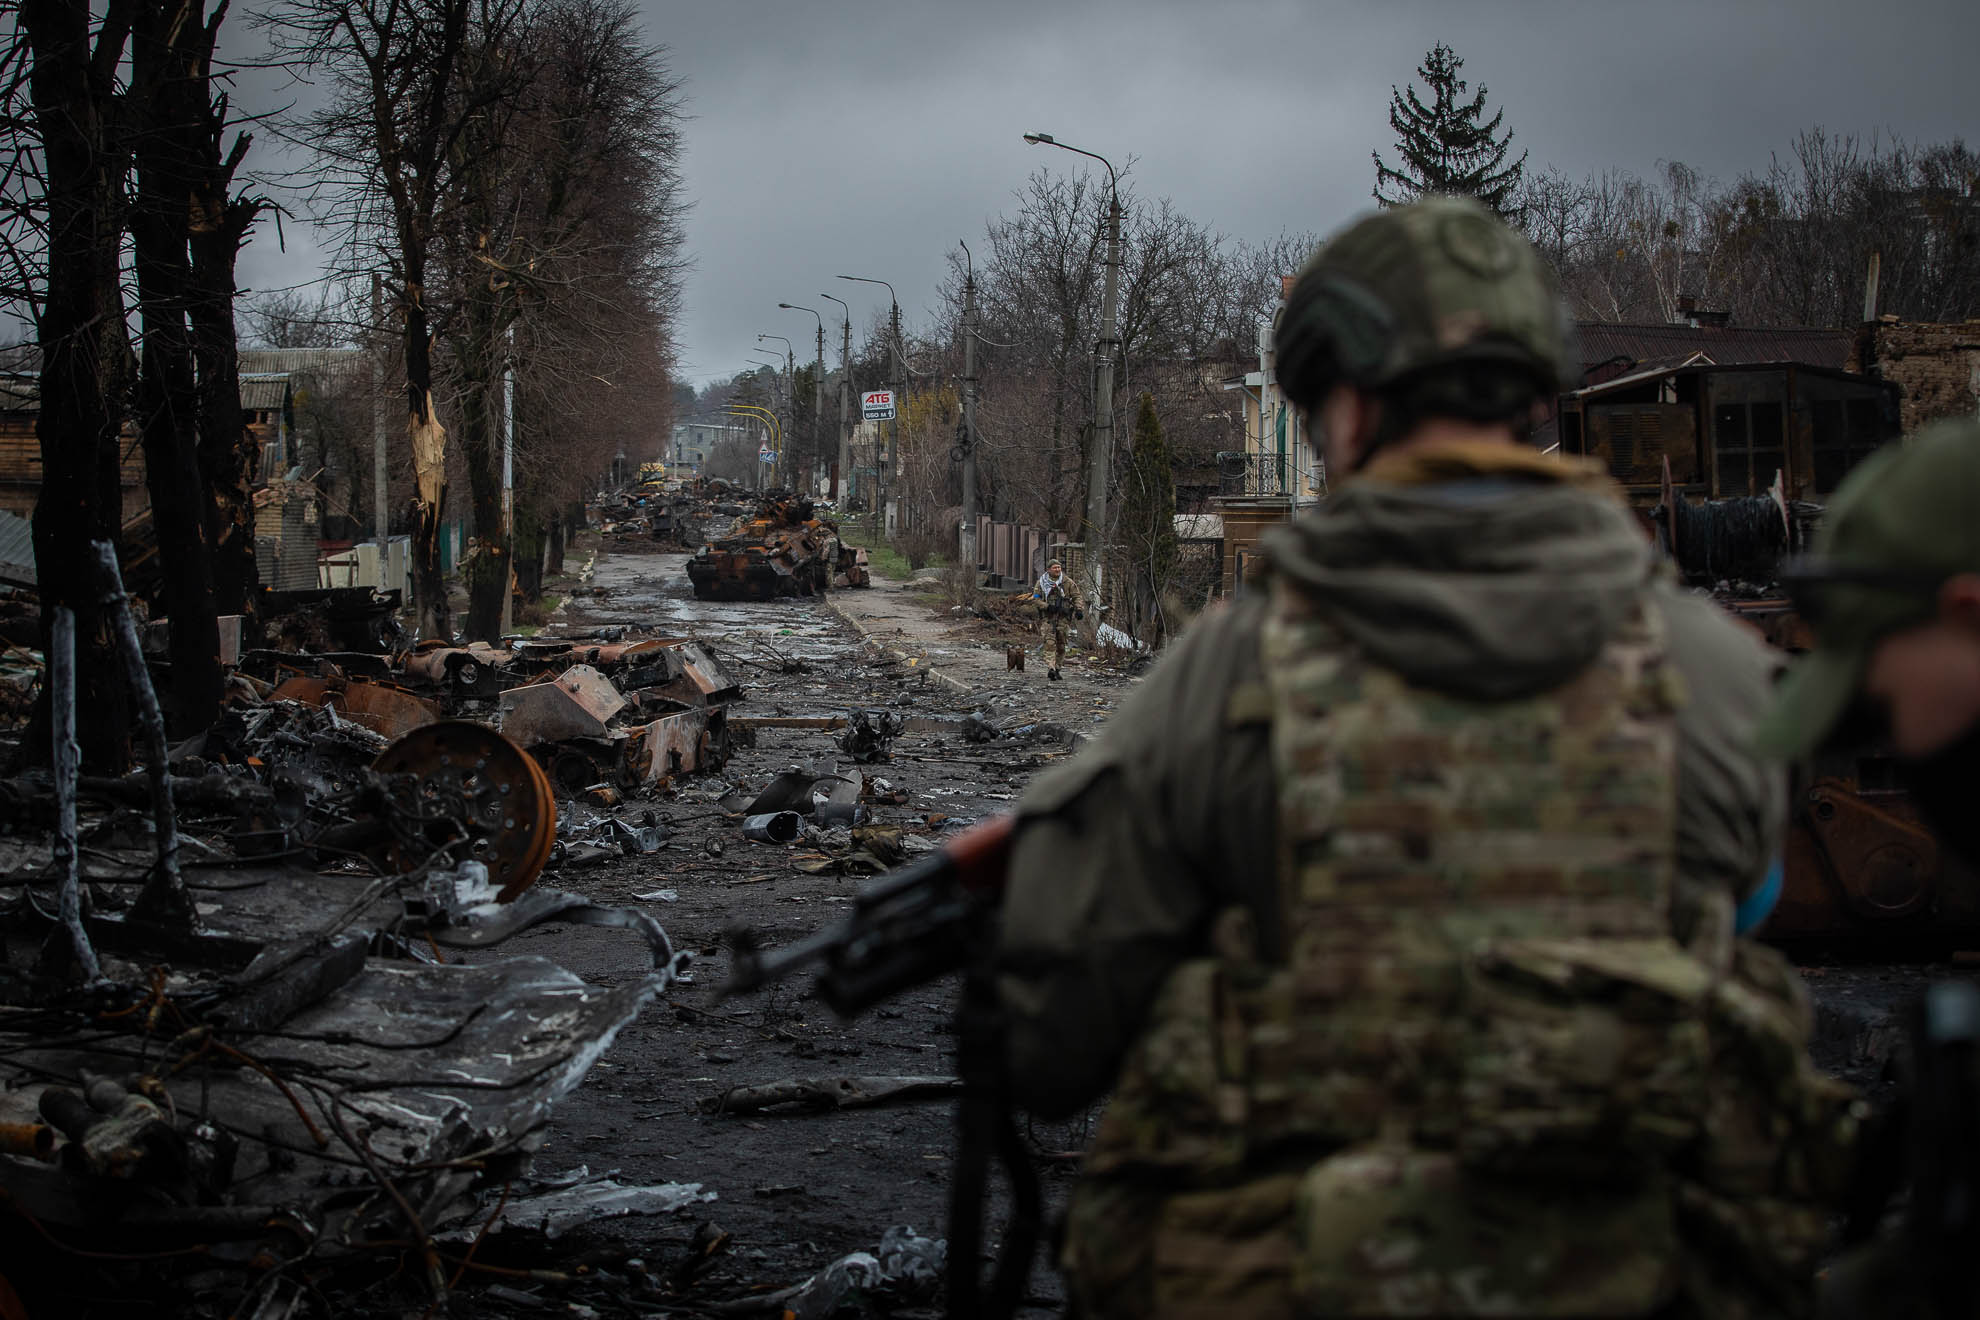 A column of tanks was attacked in an offensive by Ukrainian troops on Vokzalna Street. On Saturday, April 2, Ukrainian soldiers walked among the wreckage of Russian tanks, photographing and inspecting everything. Many of the houses around the tanks were destroyed.